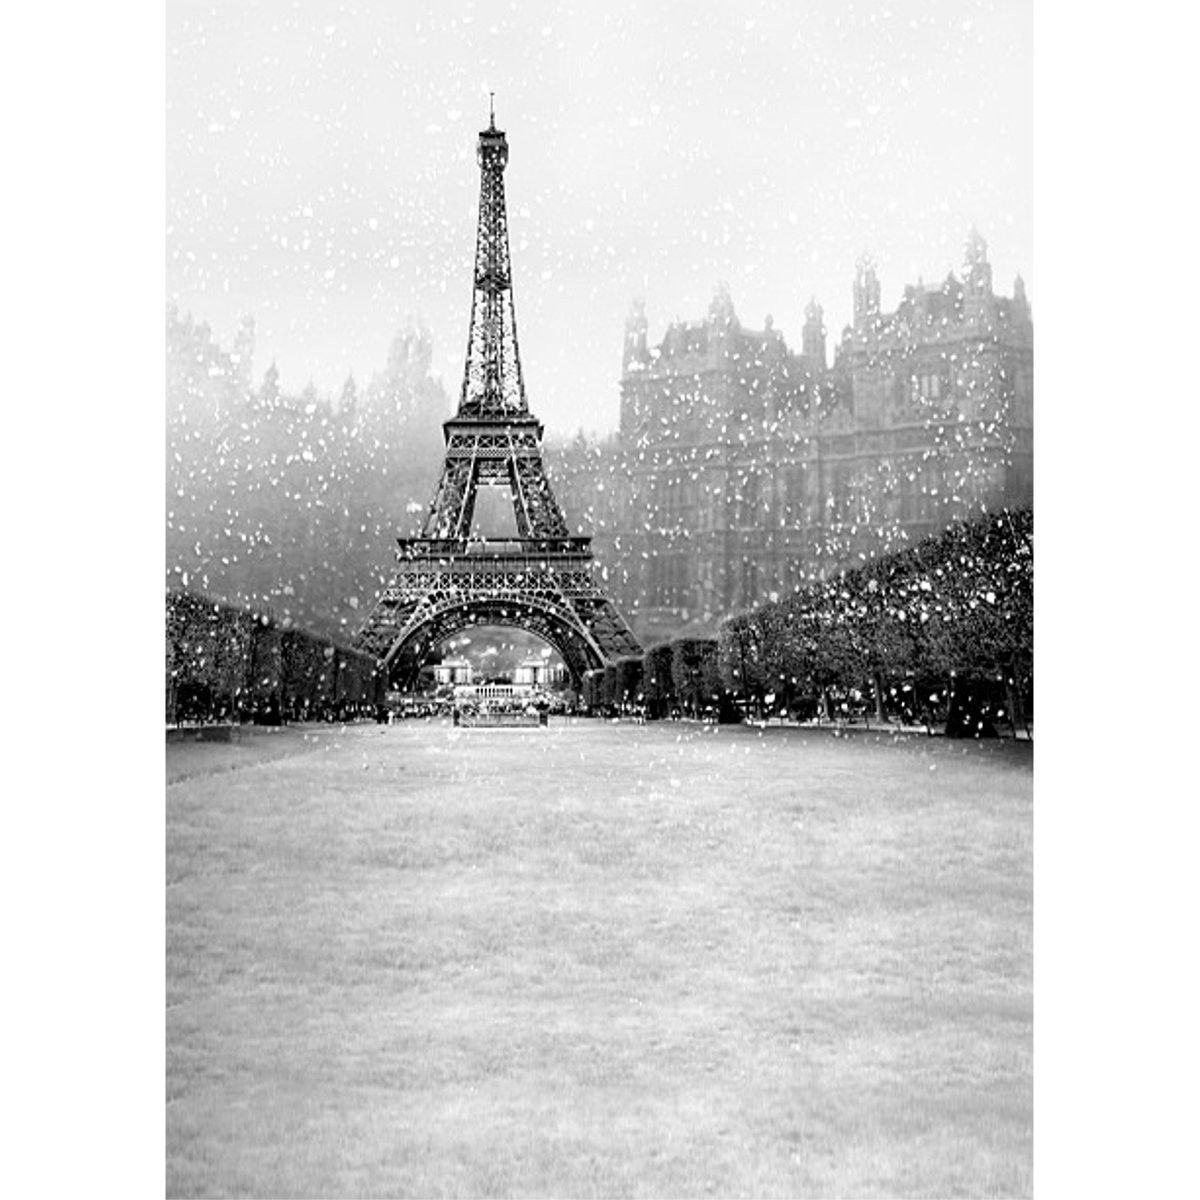 3x5ft-Vinyl-Snowflake-Eiffel-Tower-Photography-Background-Backdrop-For-Studio-Prop-1148027